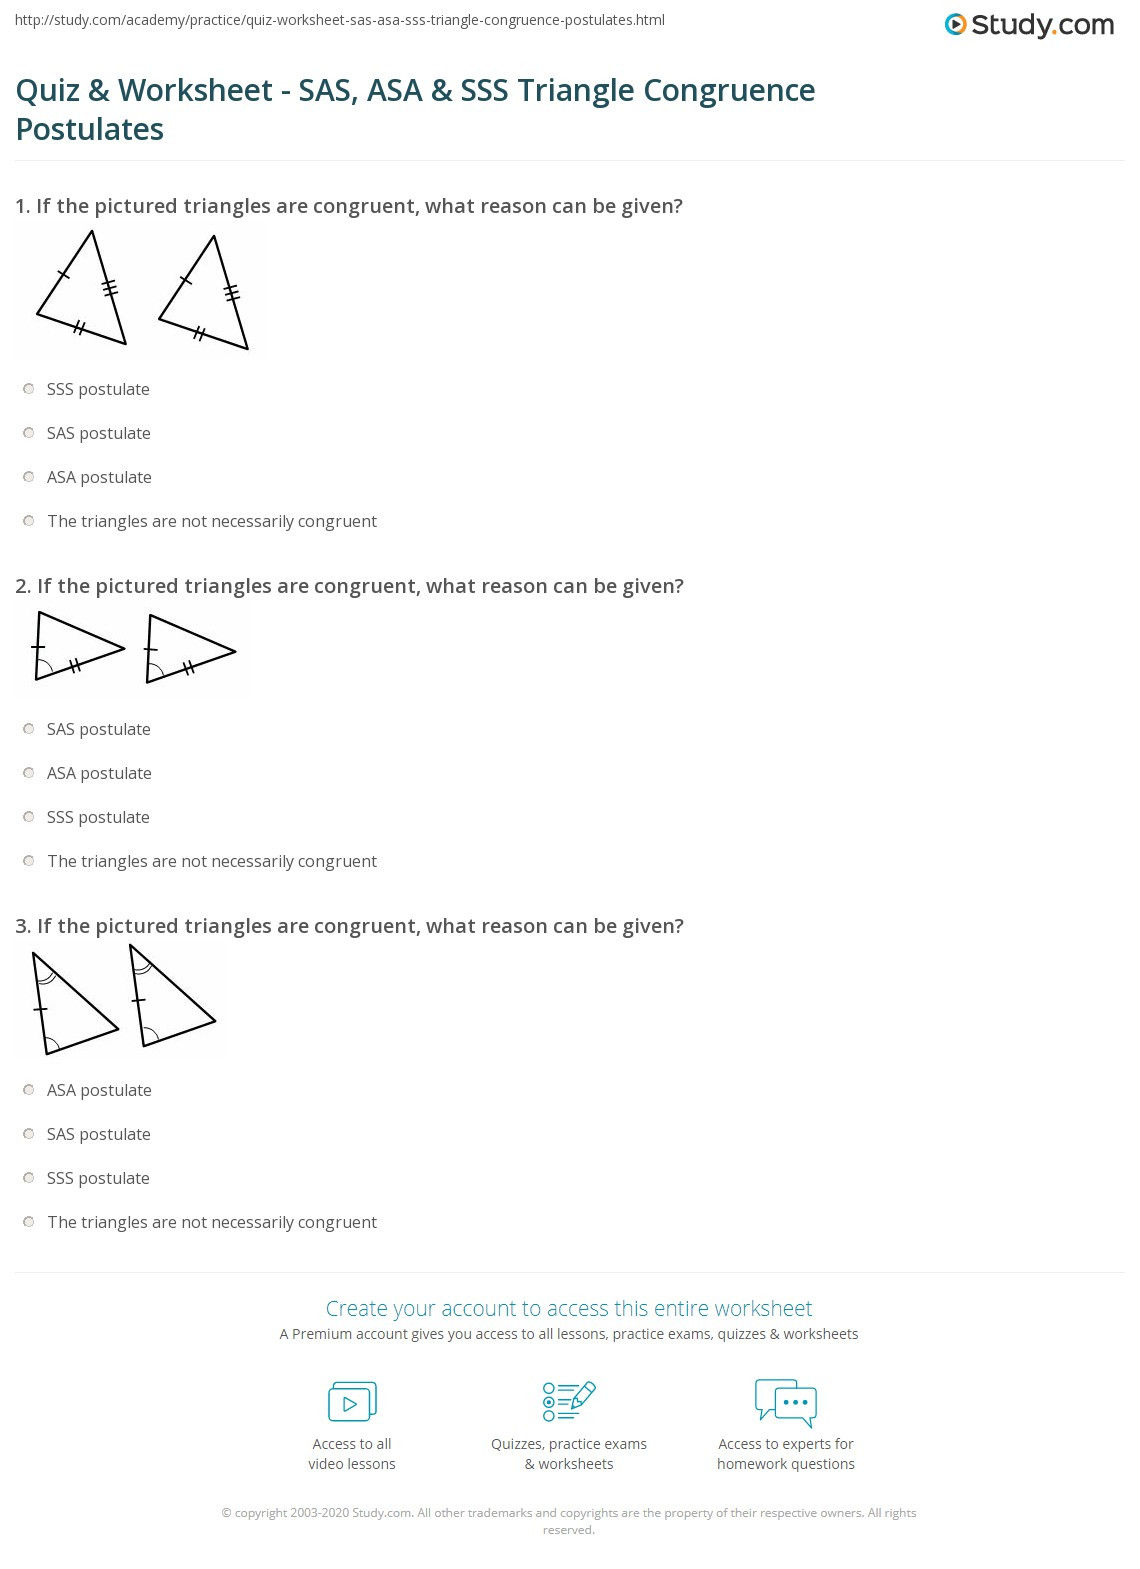 Congruent Triangles Worksheet Answers Quiz &amp; Worksheet Sas asa &amp; Sss Triangle Congruence